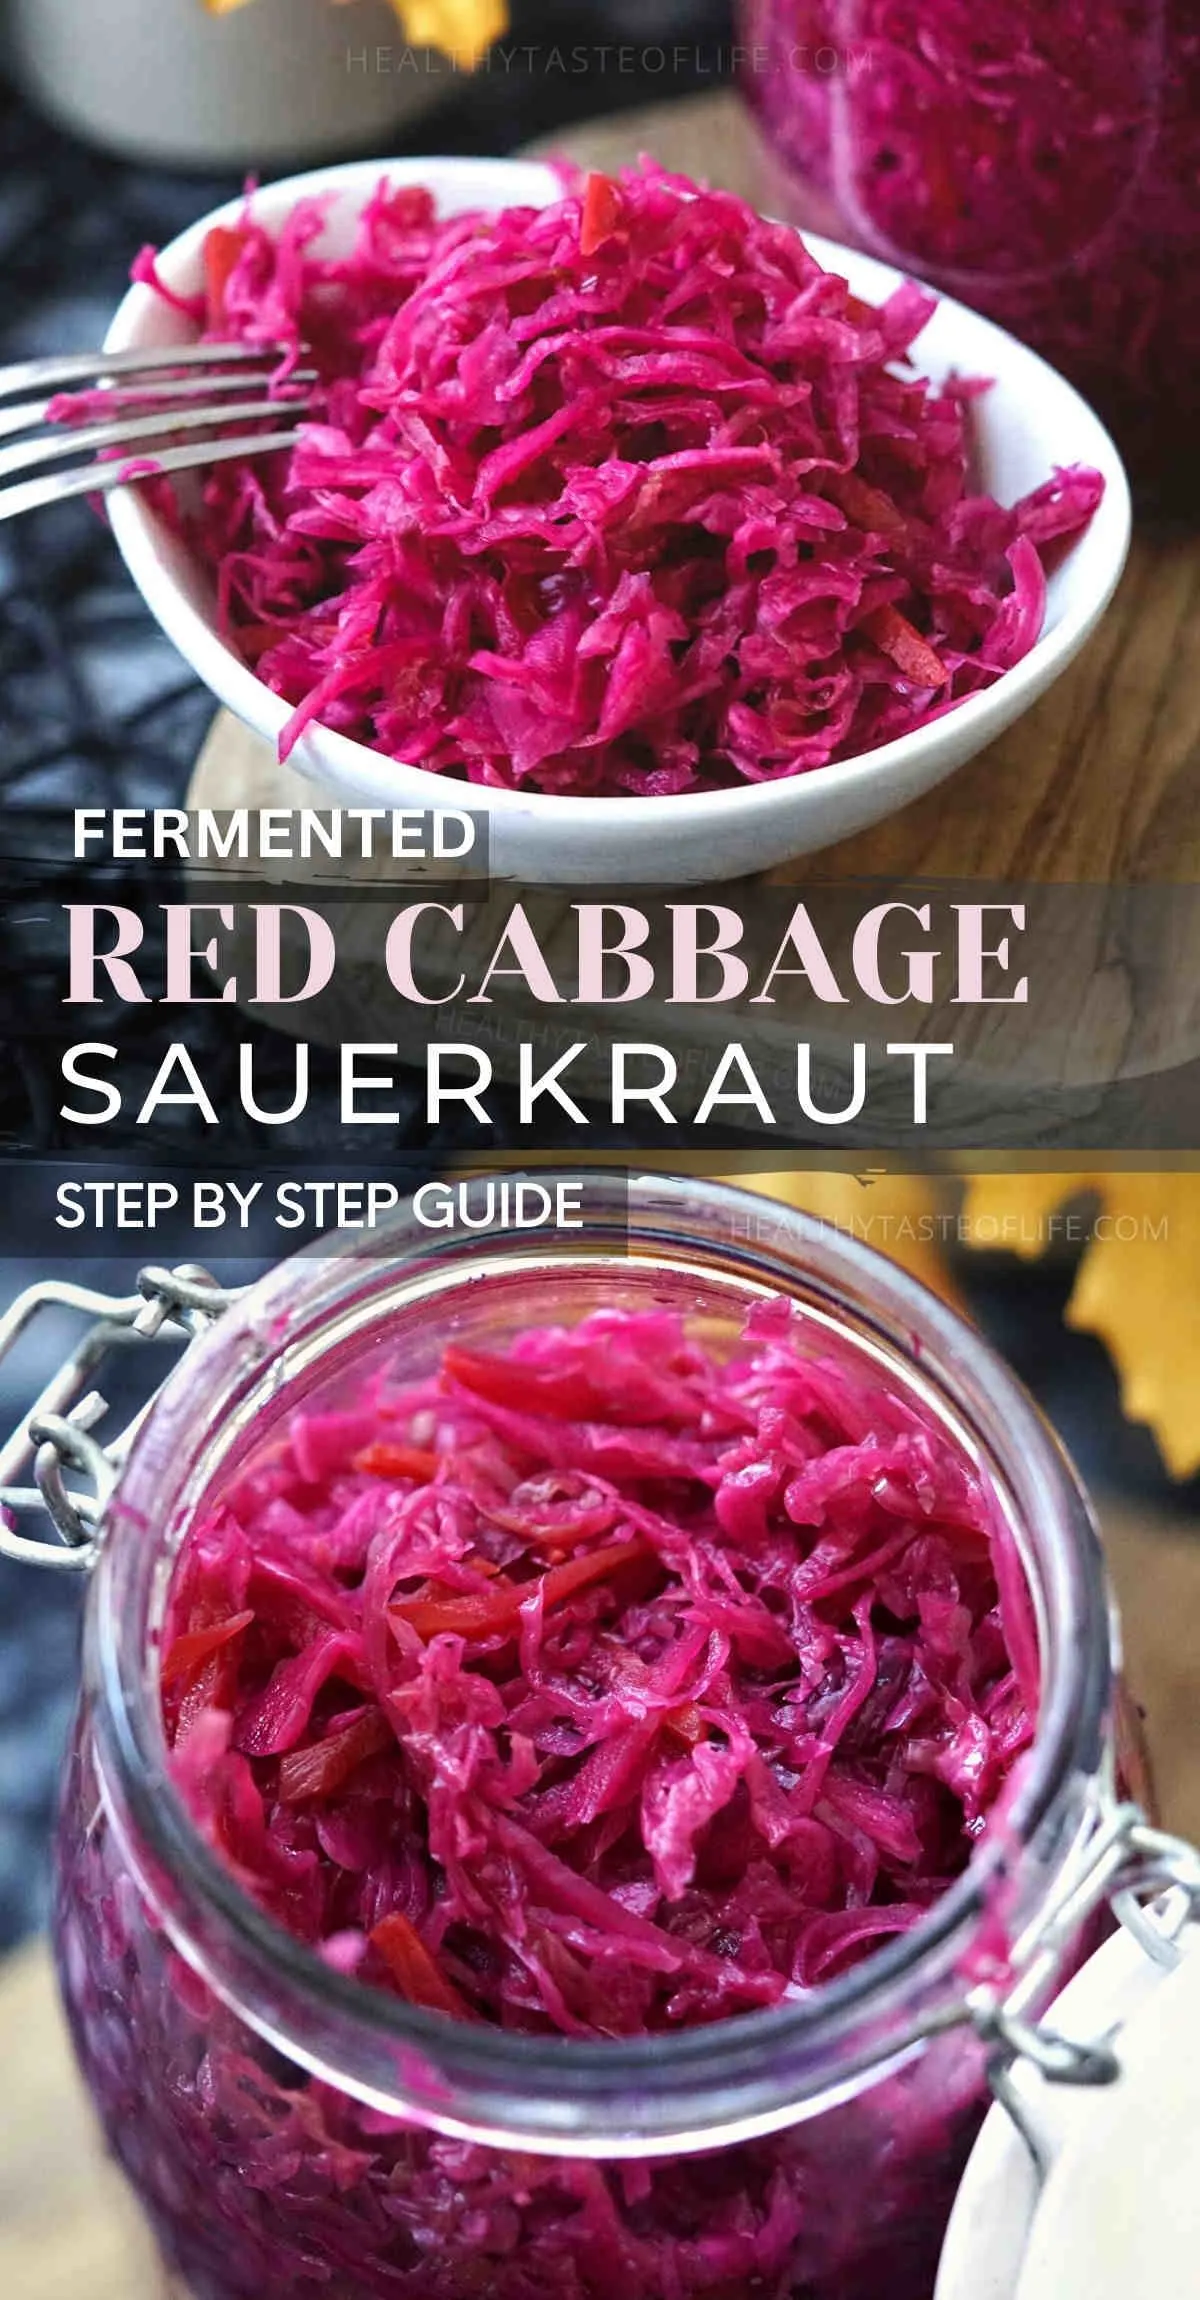 Learn how to make a tangy, crispy fermented red cabbage aka sauerkraut - easy homemade, no special equipment needed. The recipe makes about 50 oz of lacto-fermented red cabbage sauerkraut. The red sauerkraut is great enjoyed on sandwiches, as a side dish (with meat and veggie dishes) or added to salads and soups. #redcabbage #sauerkraut #recipe #easy #fermented #cabbage